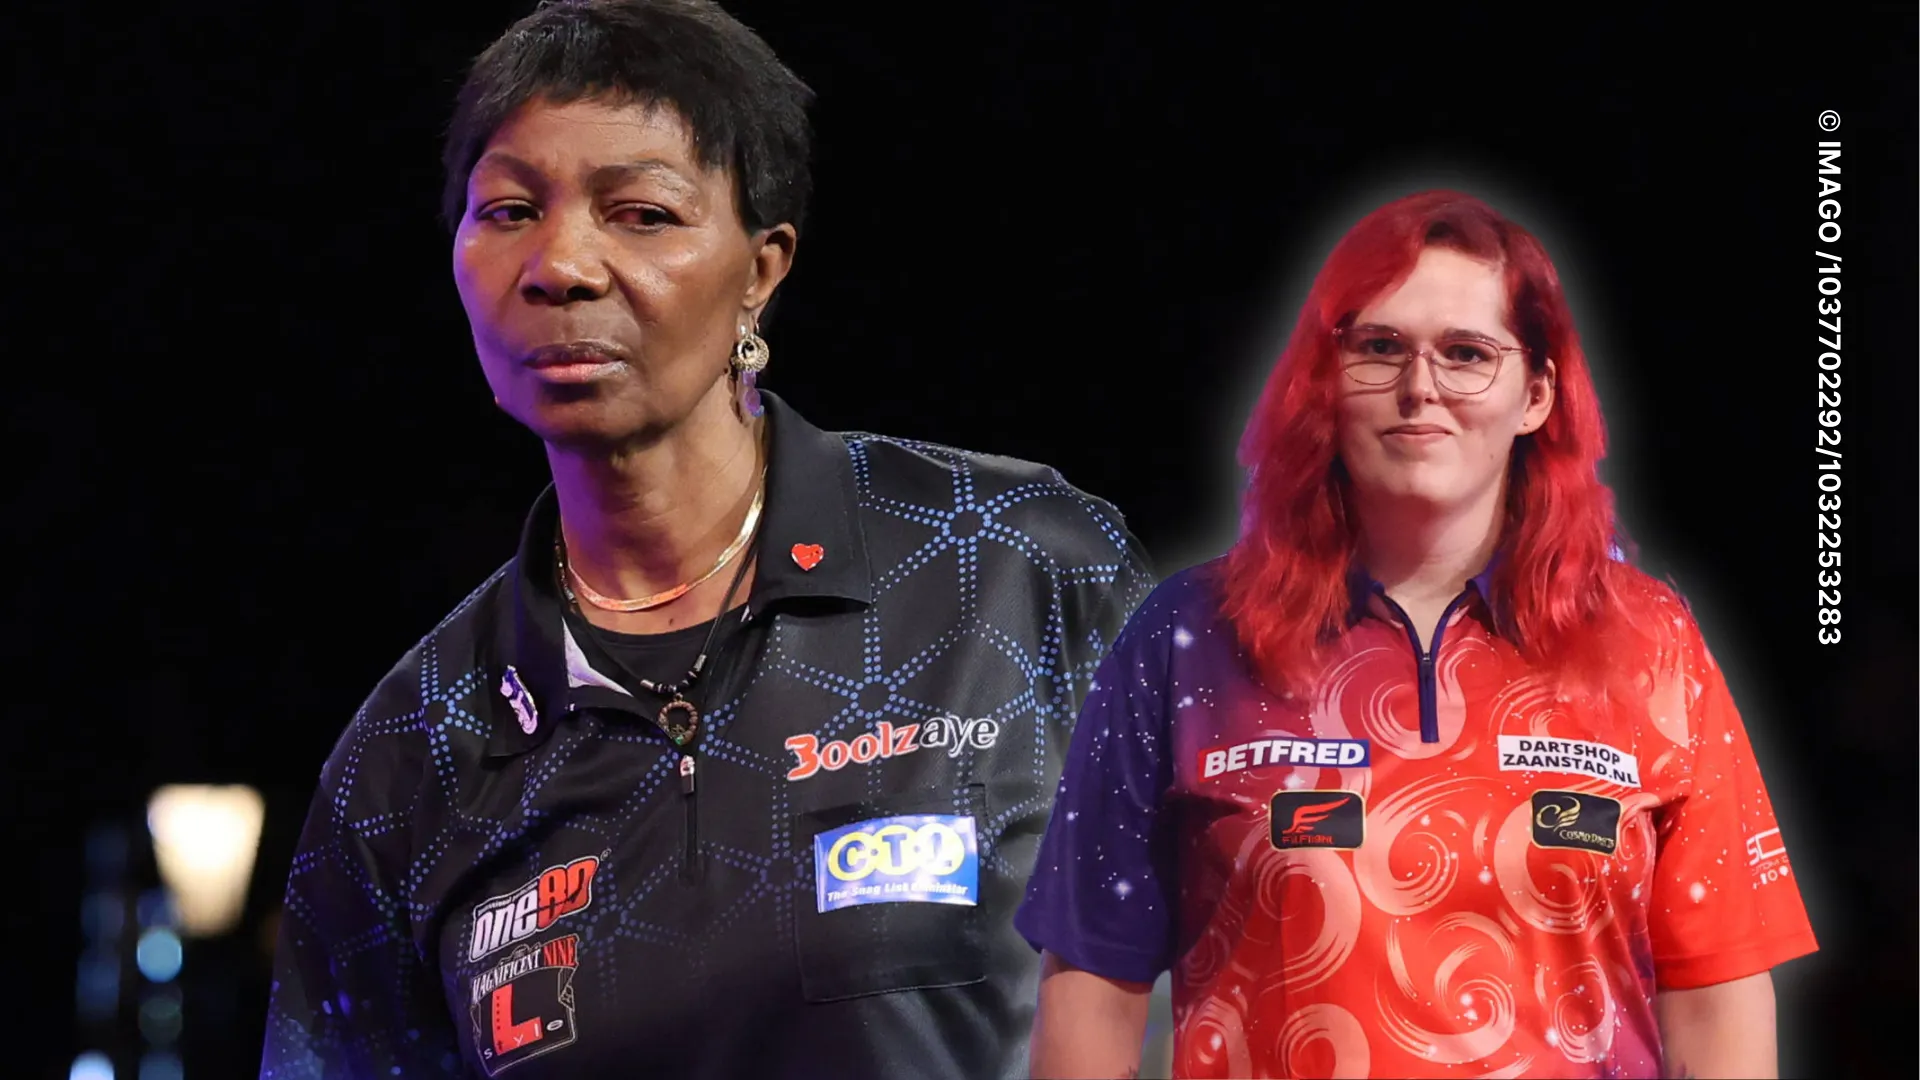 Darts player refuses to play match against trans woman